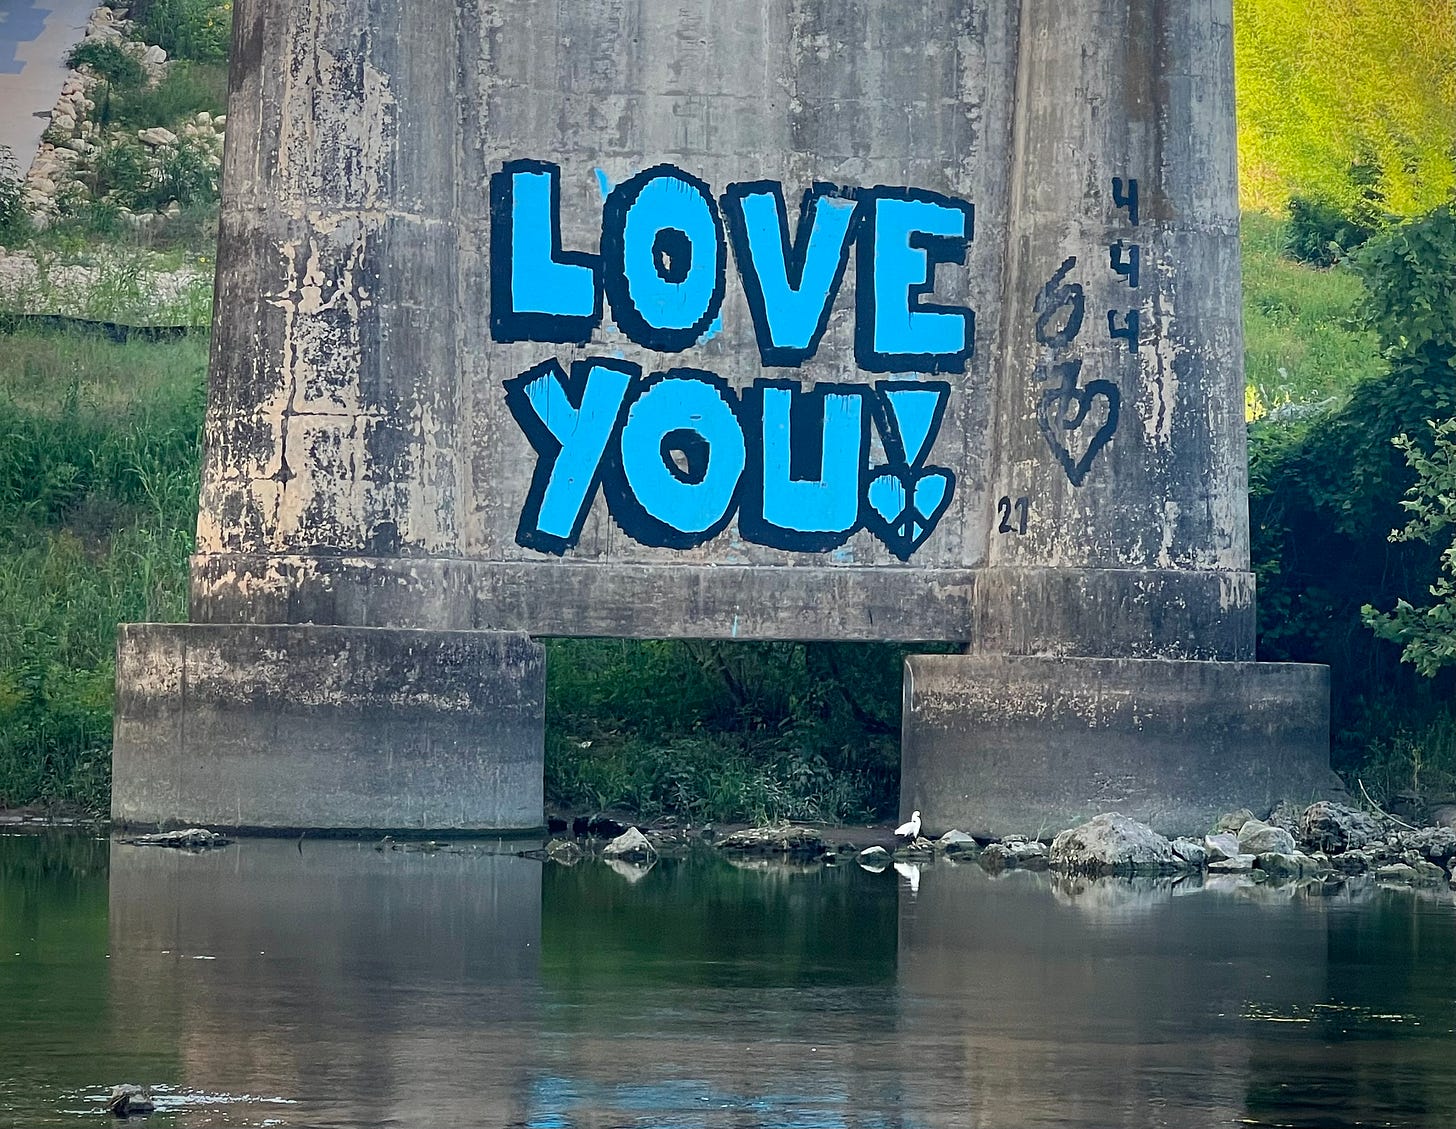 Bridge pillar with LOVE YOU! graffiti and an egret fishing in the river shallows